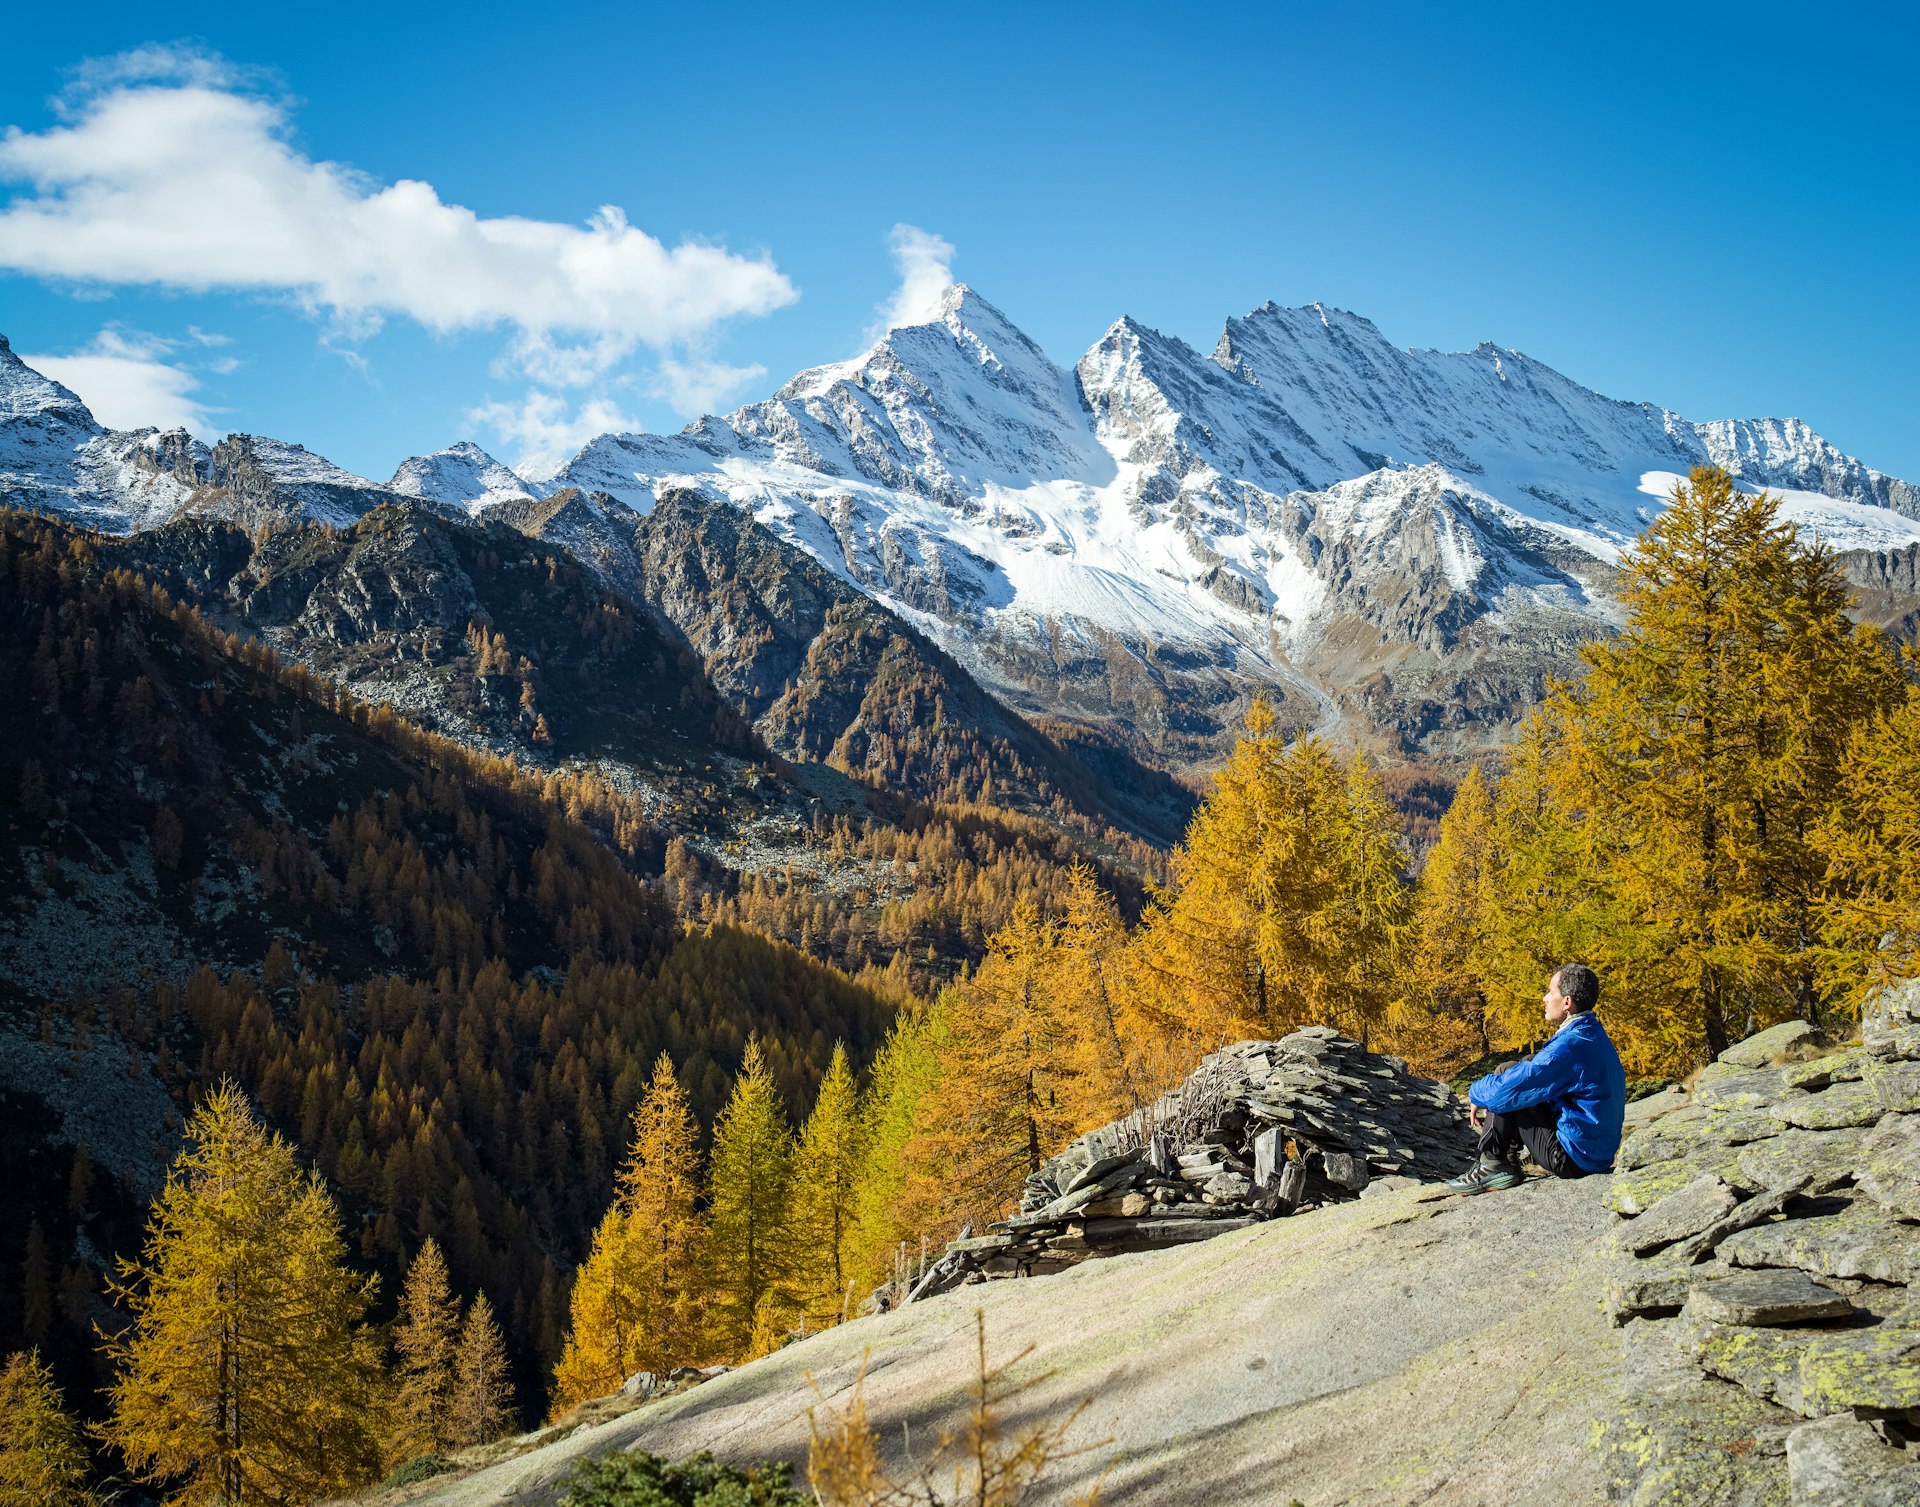 Hiker relaxes in the mountainous landscape of the Italian Alps along the Sella Herbetet Traverse